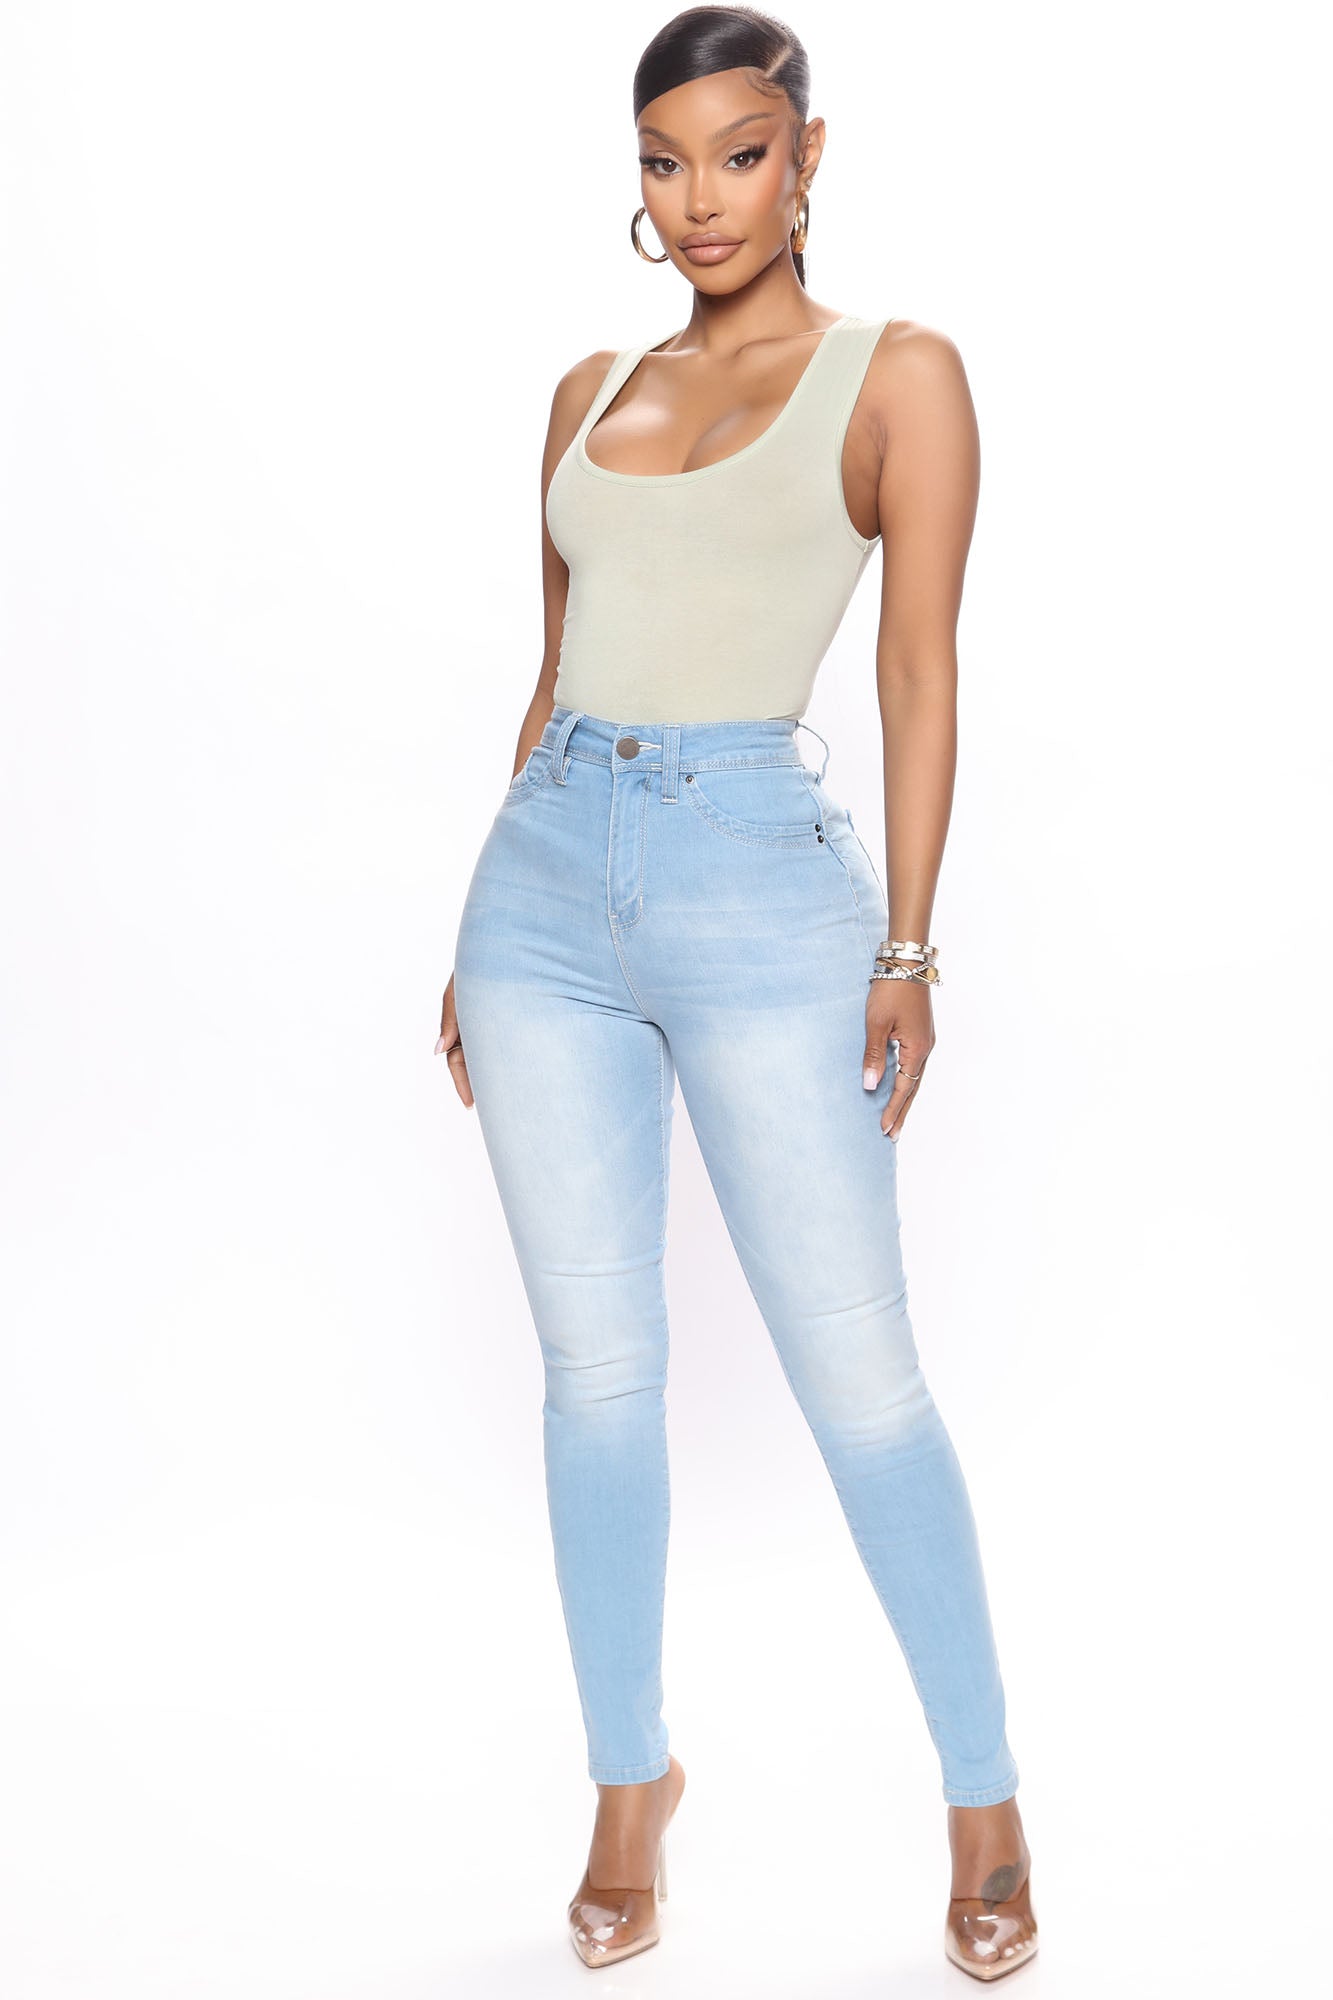 Statuesque Booty Lifting Jeans - Light Blue Wash